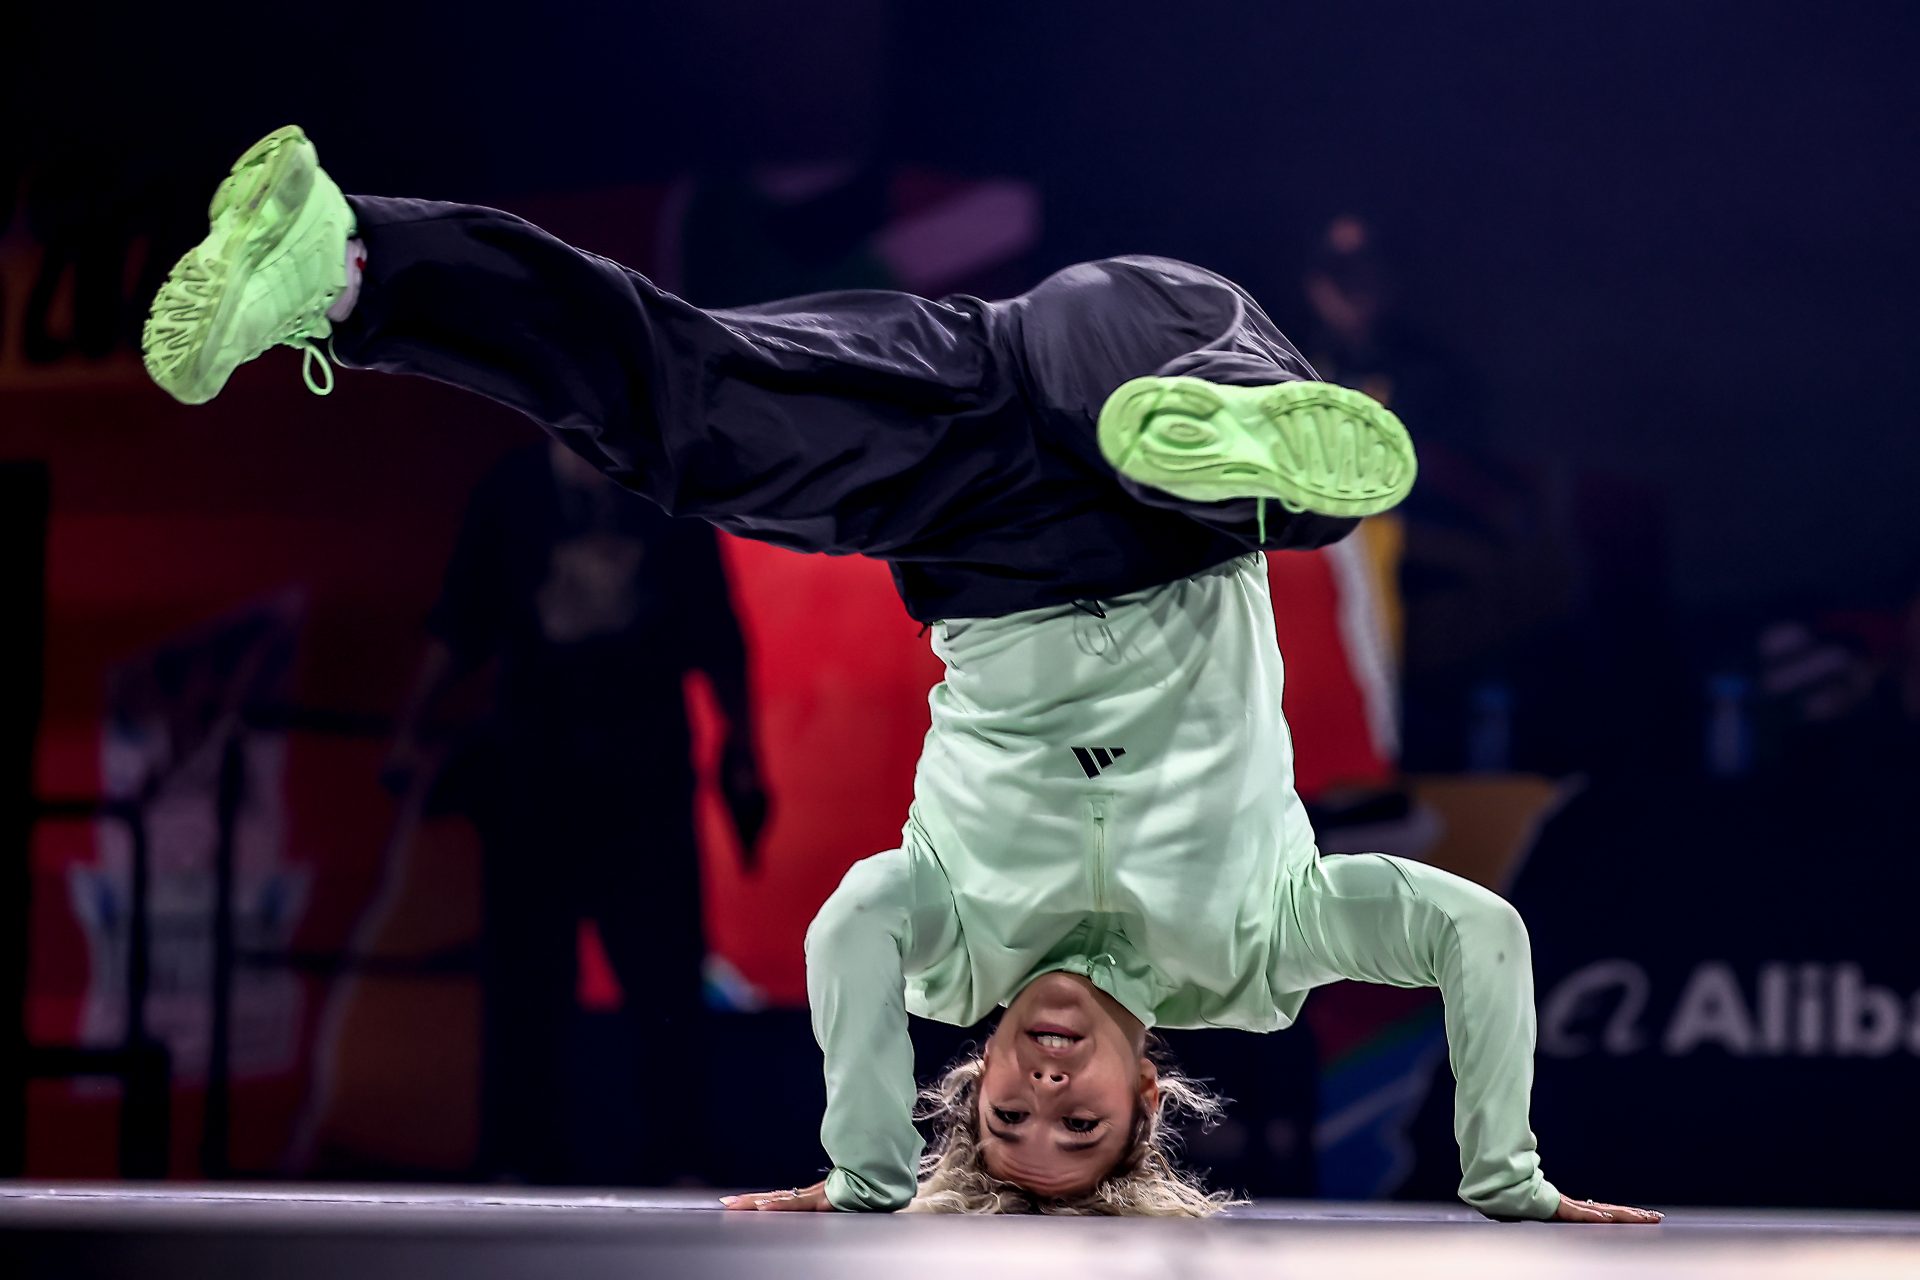 Bust a move: All you need to know about breakdancing’s debut at the Olympics